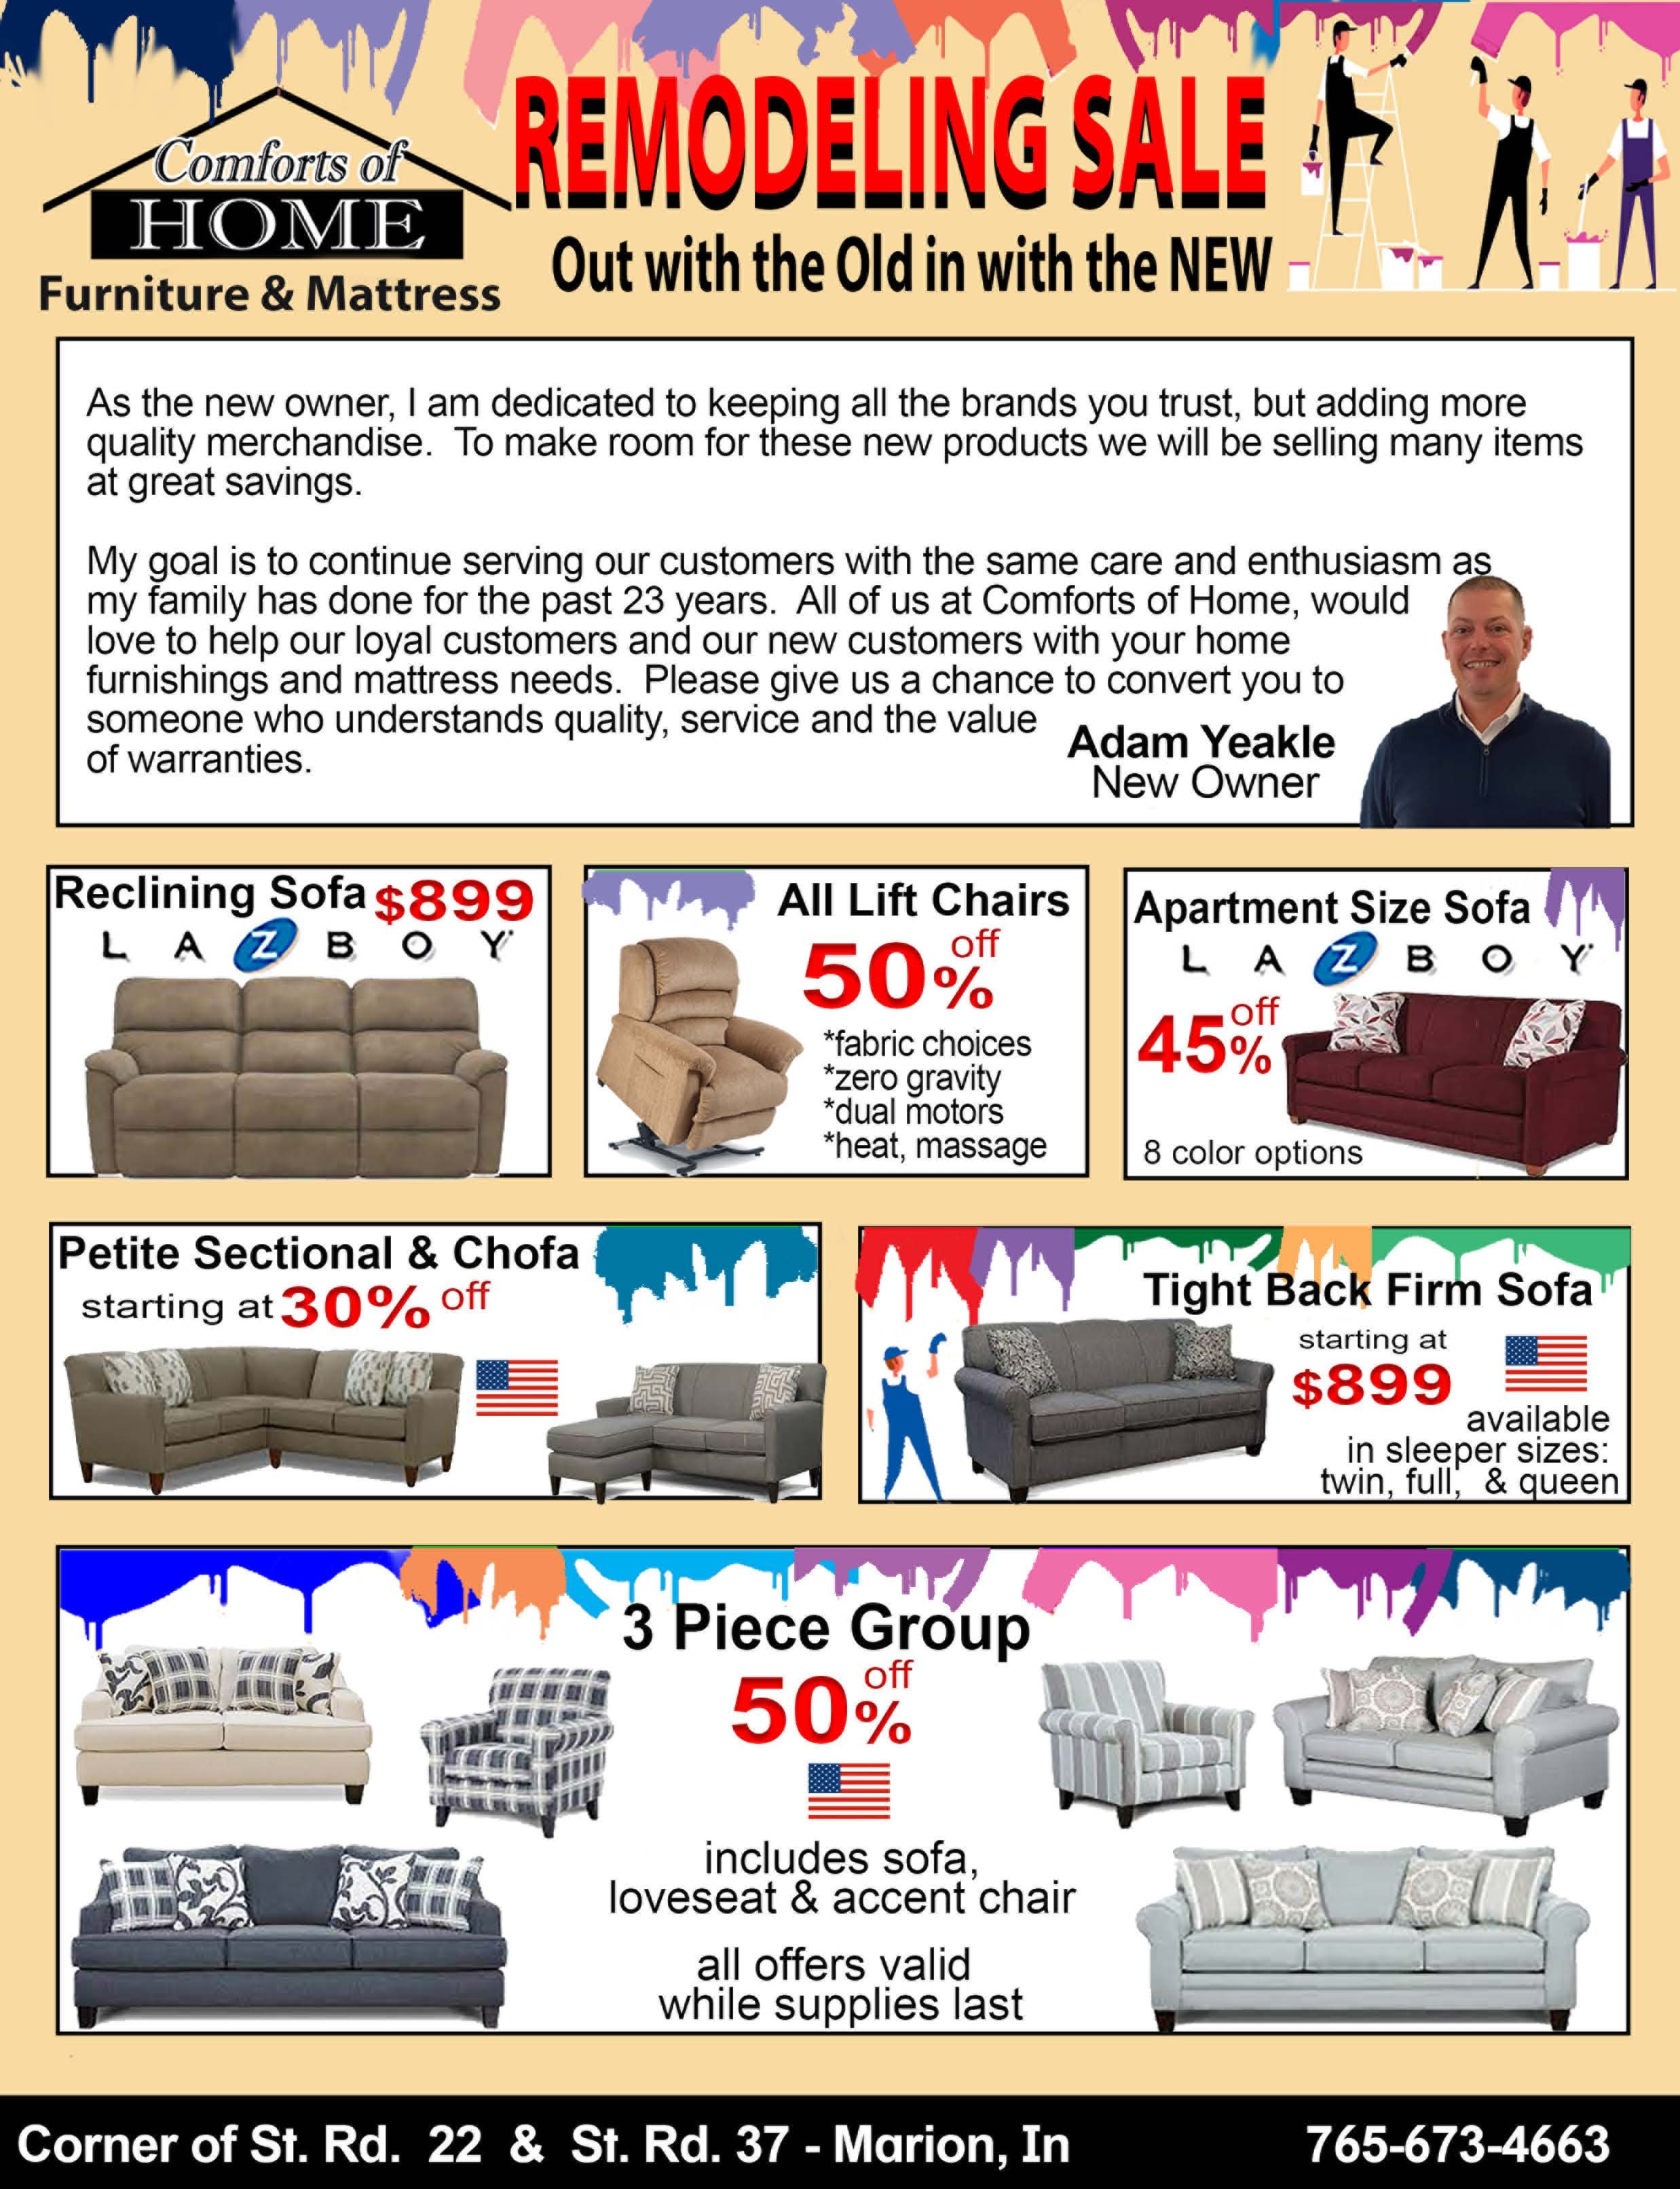 Remodeling sale; lazboy; sofa sale; recliner sale; paint; stearns and foster; mattress; massage chair; lighting; lamps; outdoor furniture; 